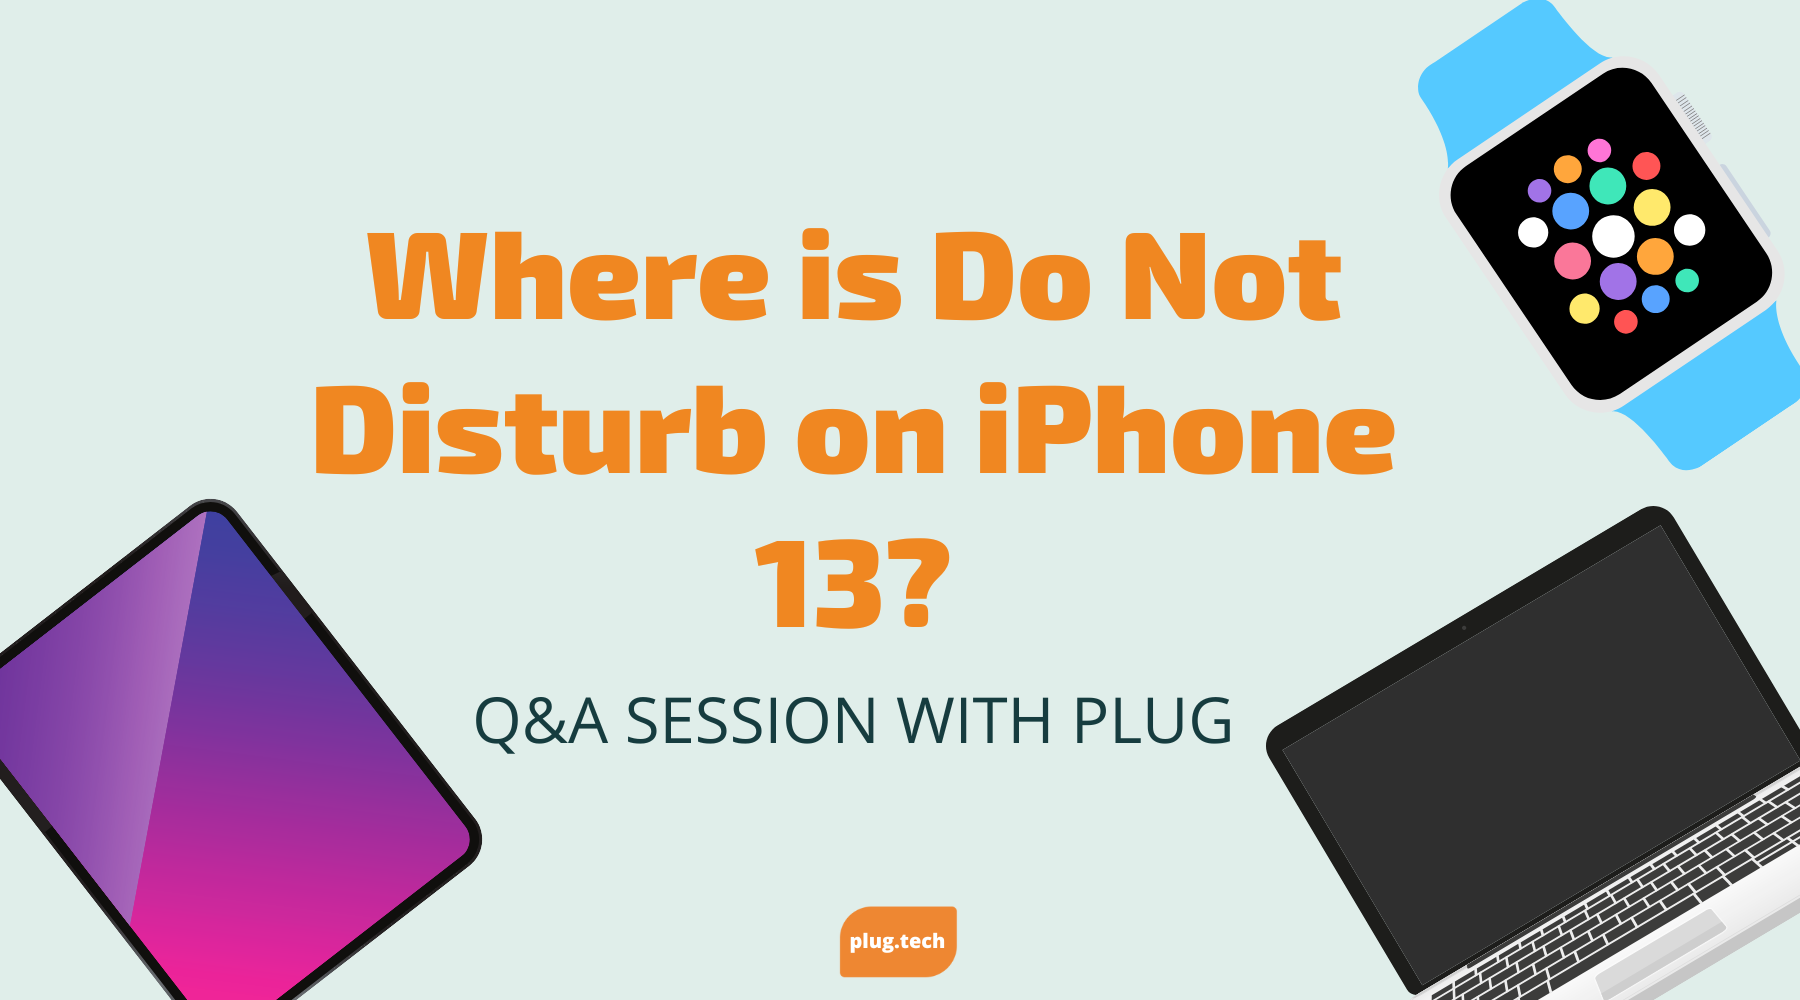 Where is Do Not Disturb on iPhone 13?